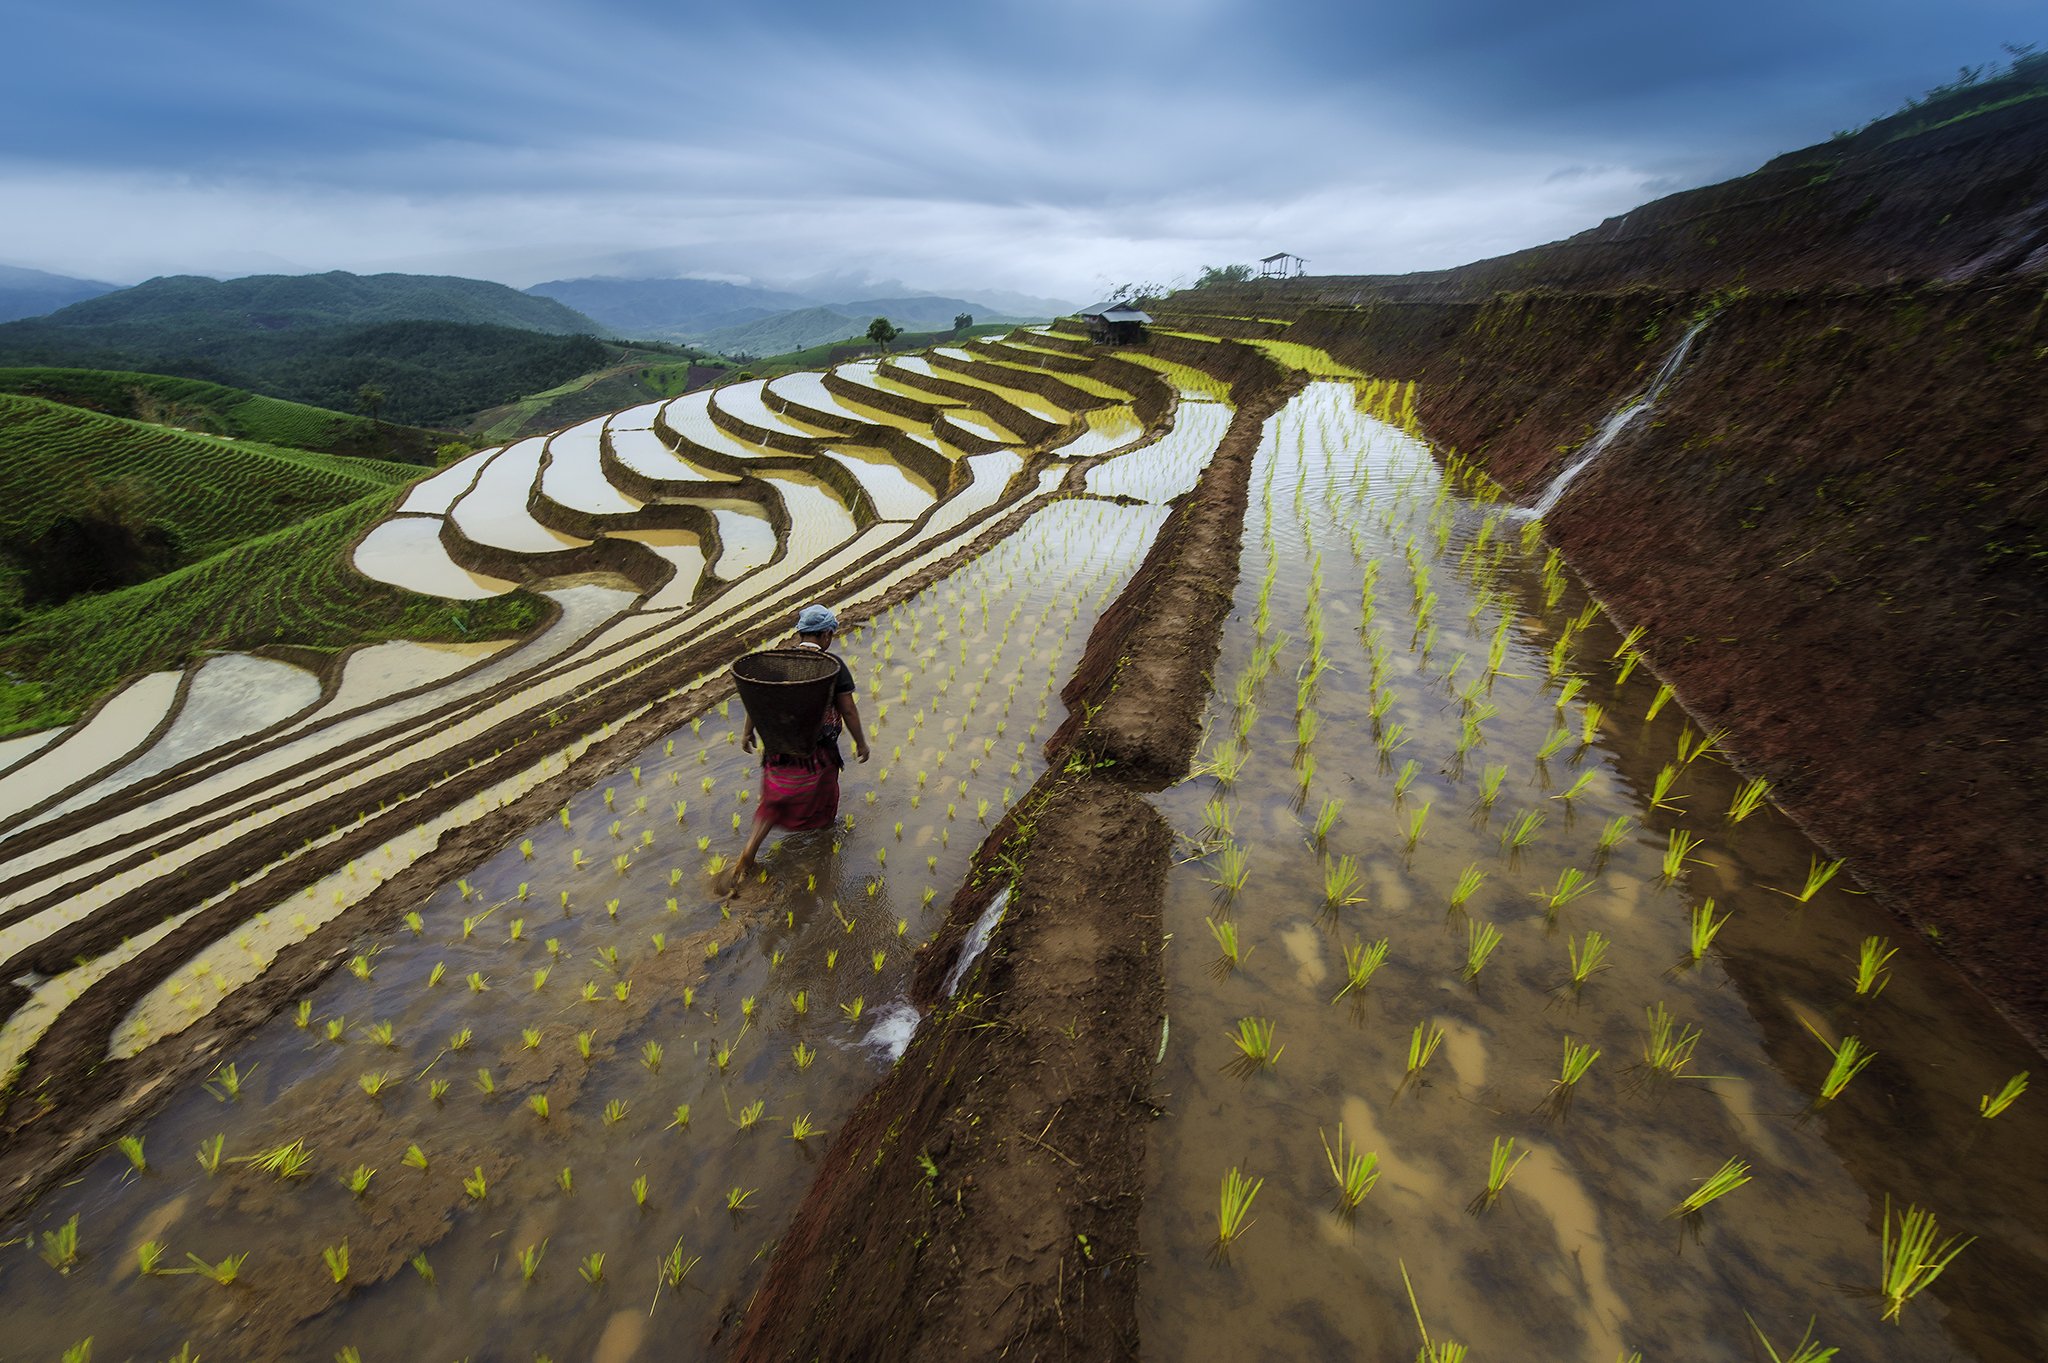 Asia, Asian, Blue, Clouds, Culture, Field, Green, Paddy, People, Rice, Sky, Terraces rice field, Saravut Whanset